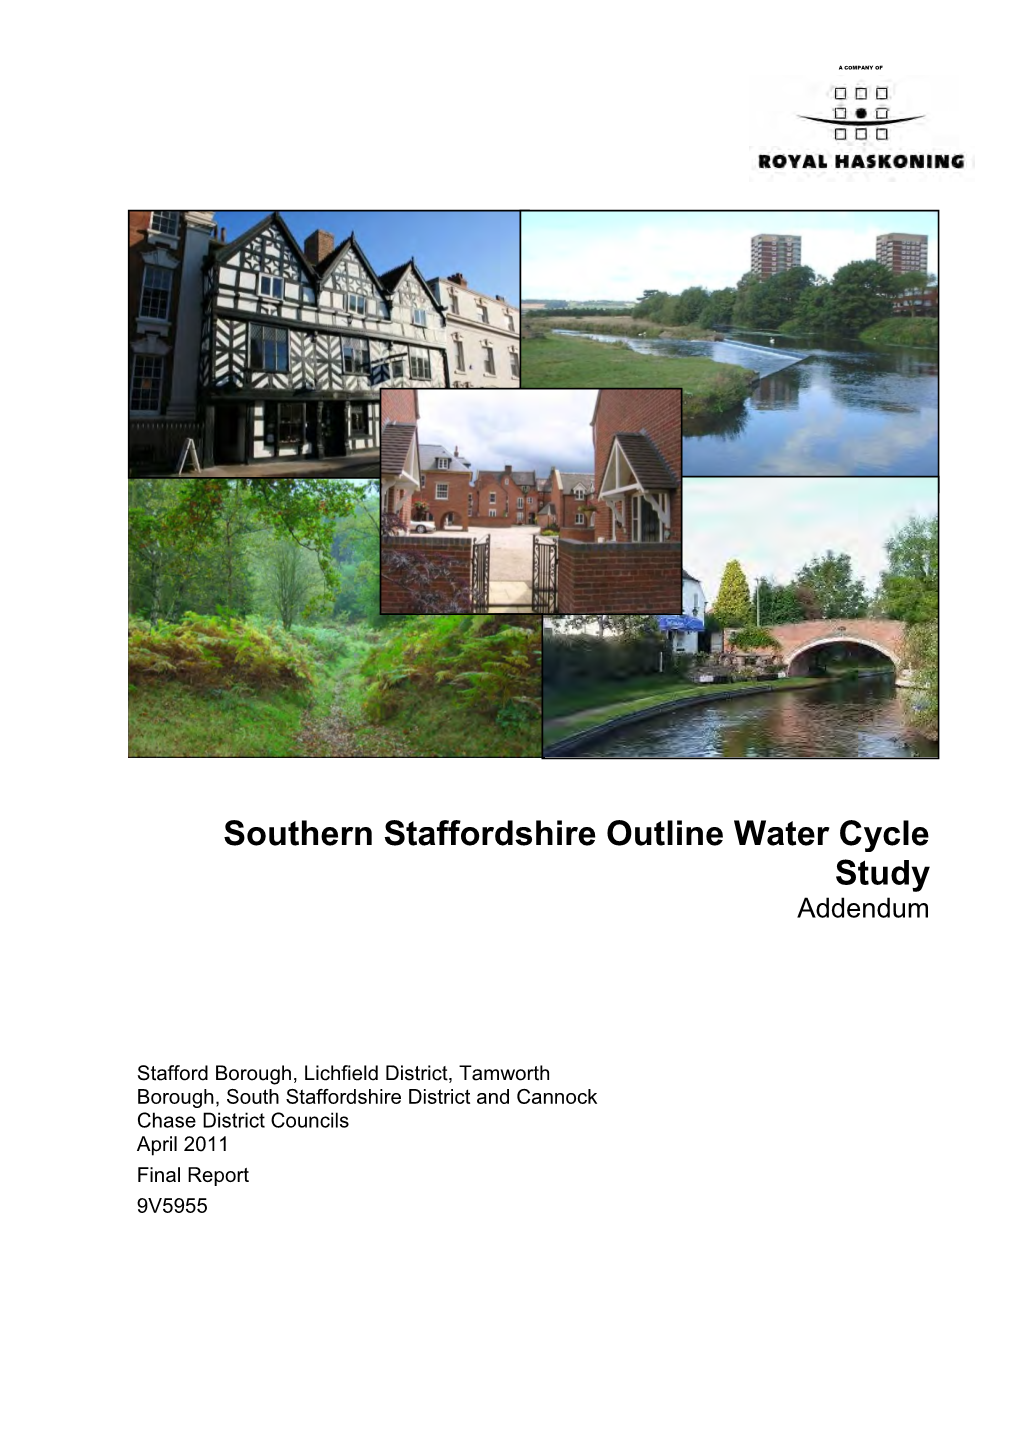 Southern Staffordshire Outline Water Cycle Study Addendum